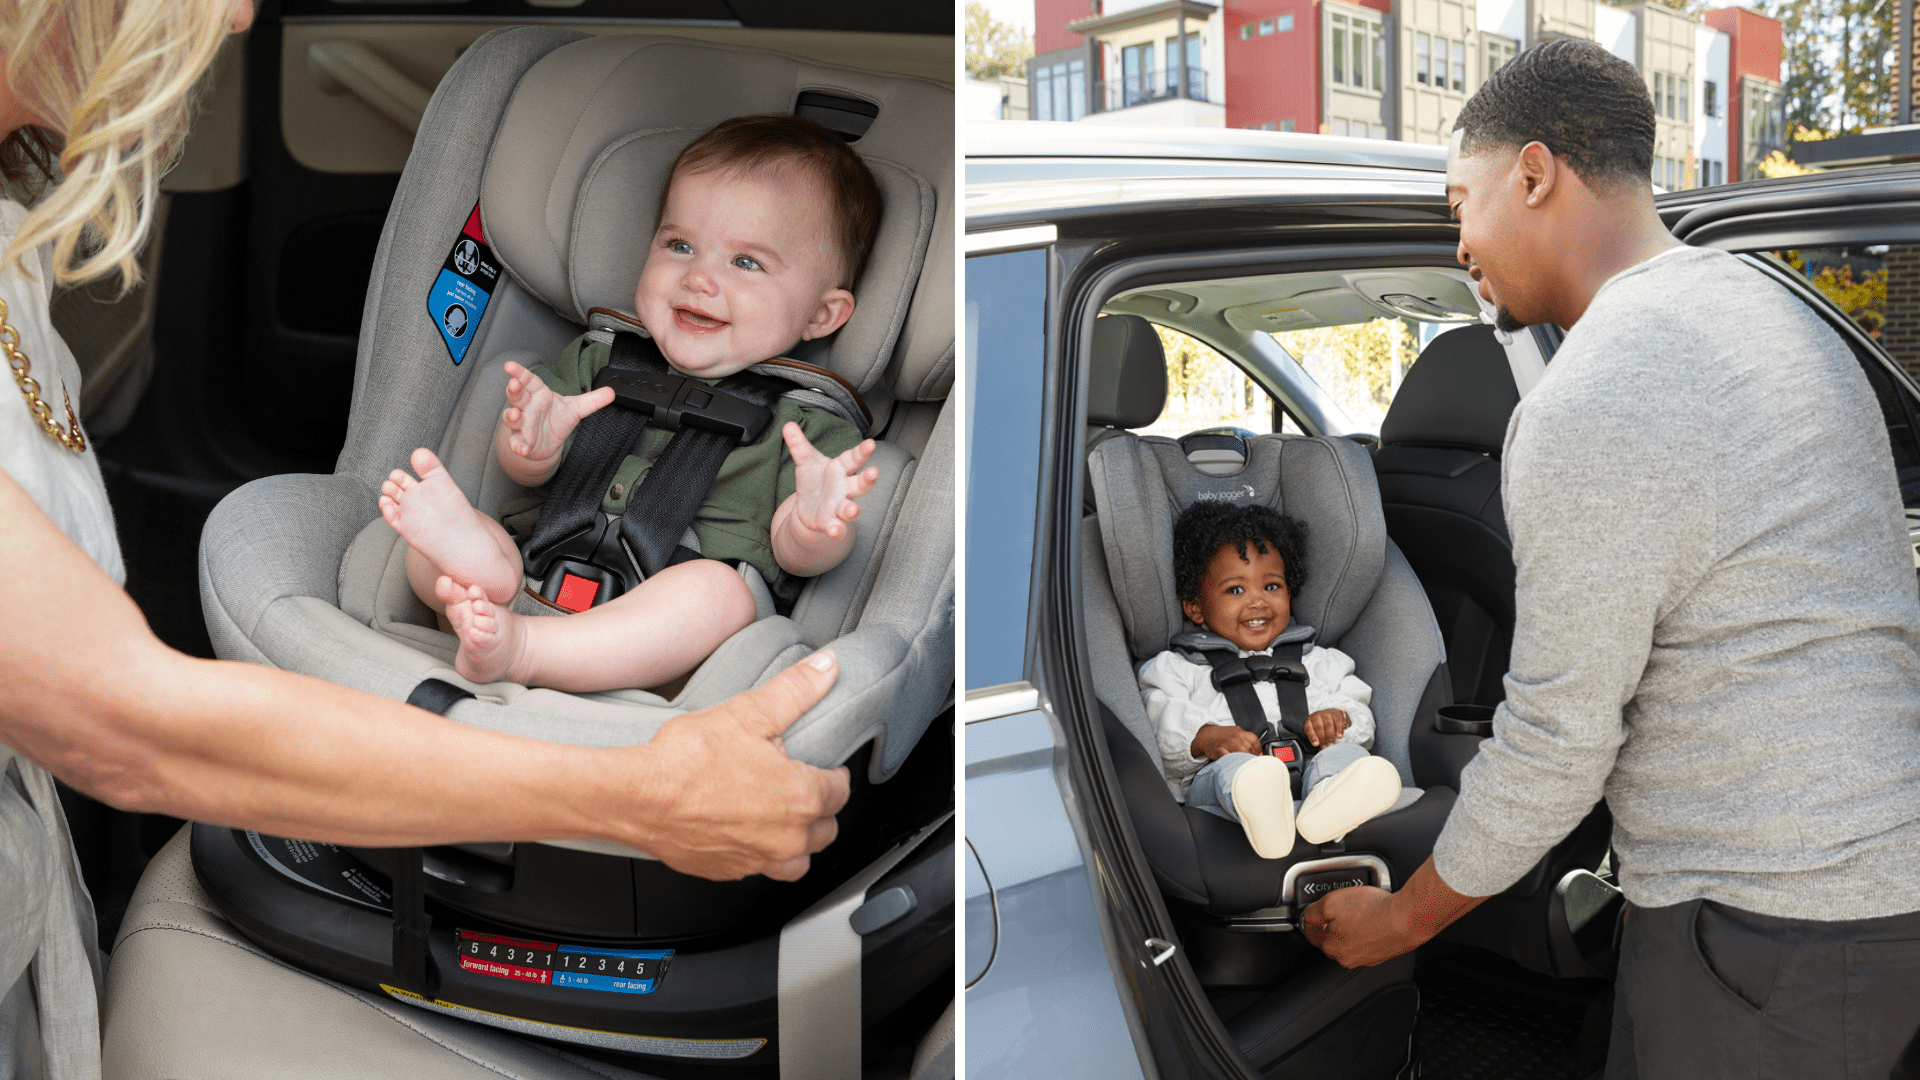 Car seat guide: How to buy infant, convertible and booster car